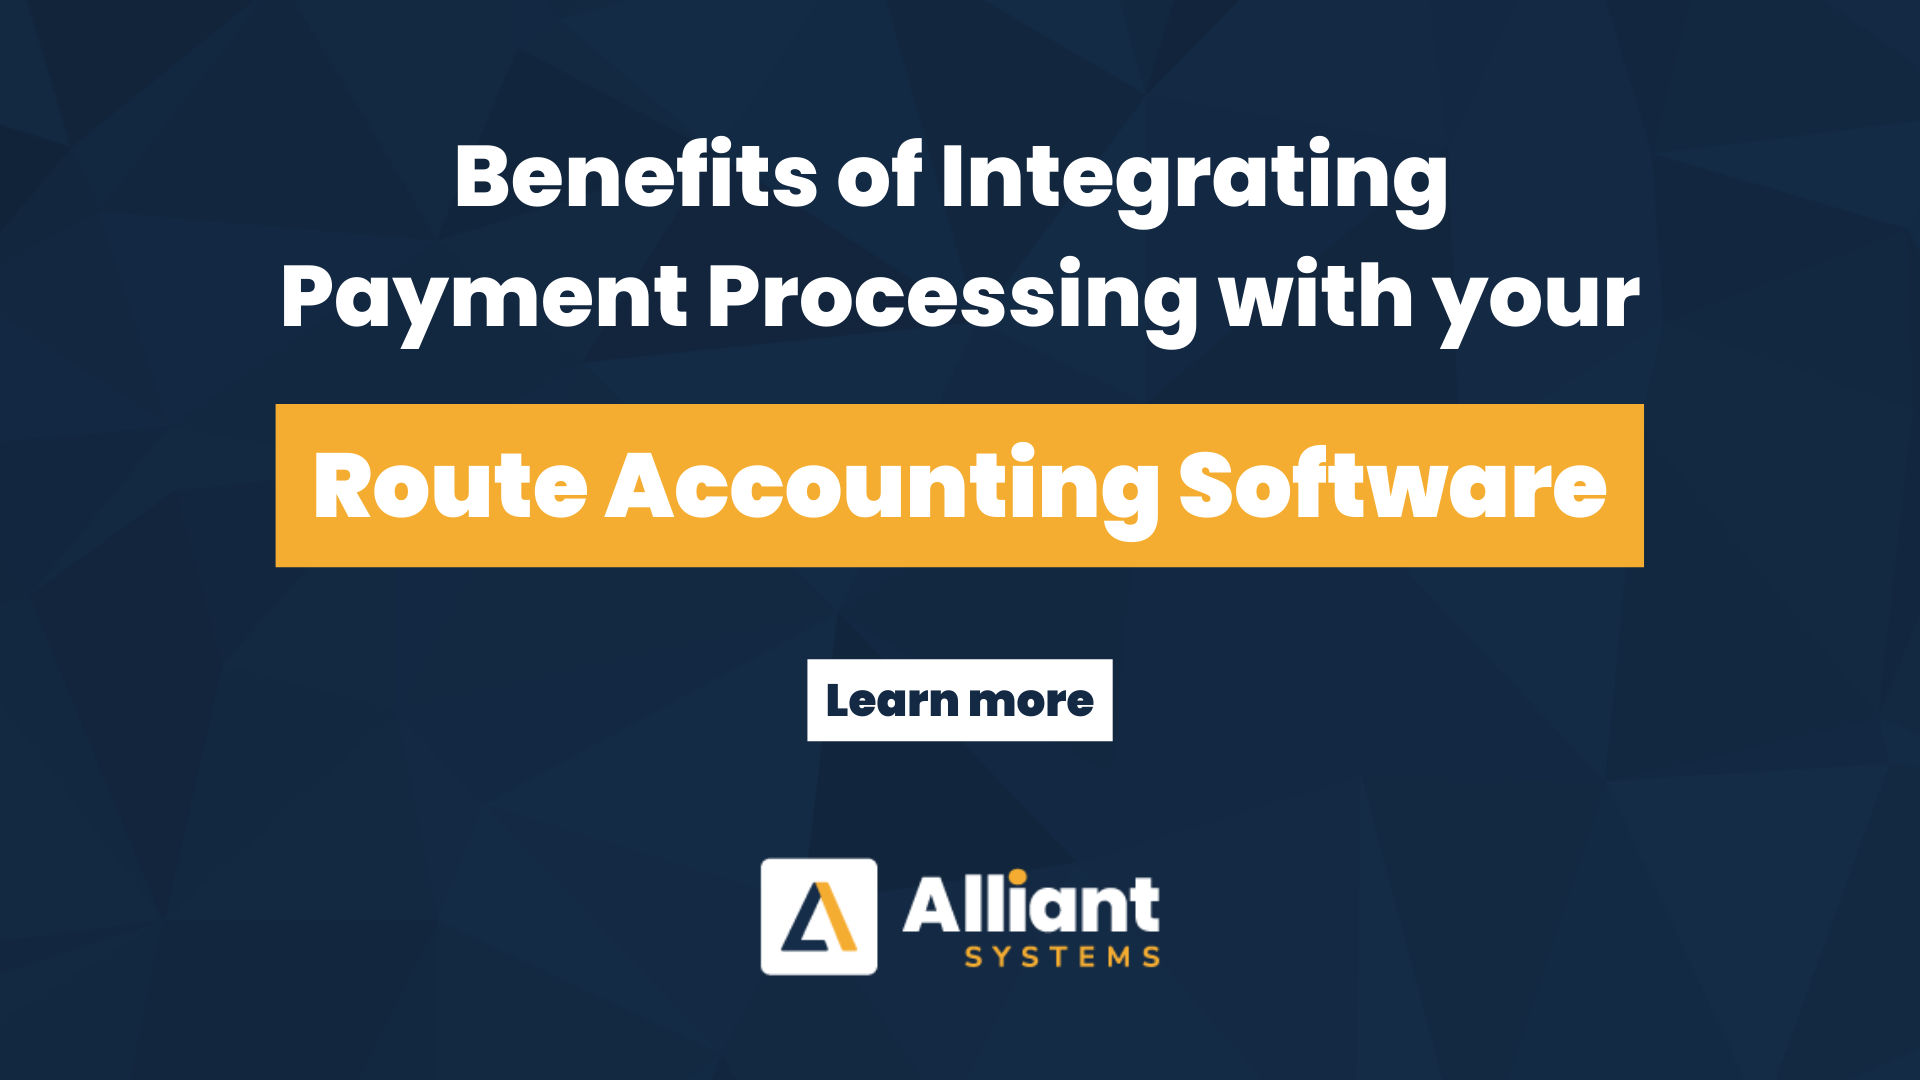 Benefits of Integrating Payment Processing with your Route Accounting Software